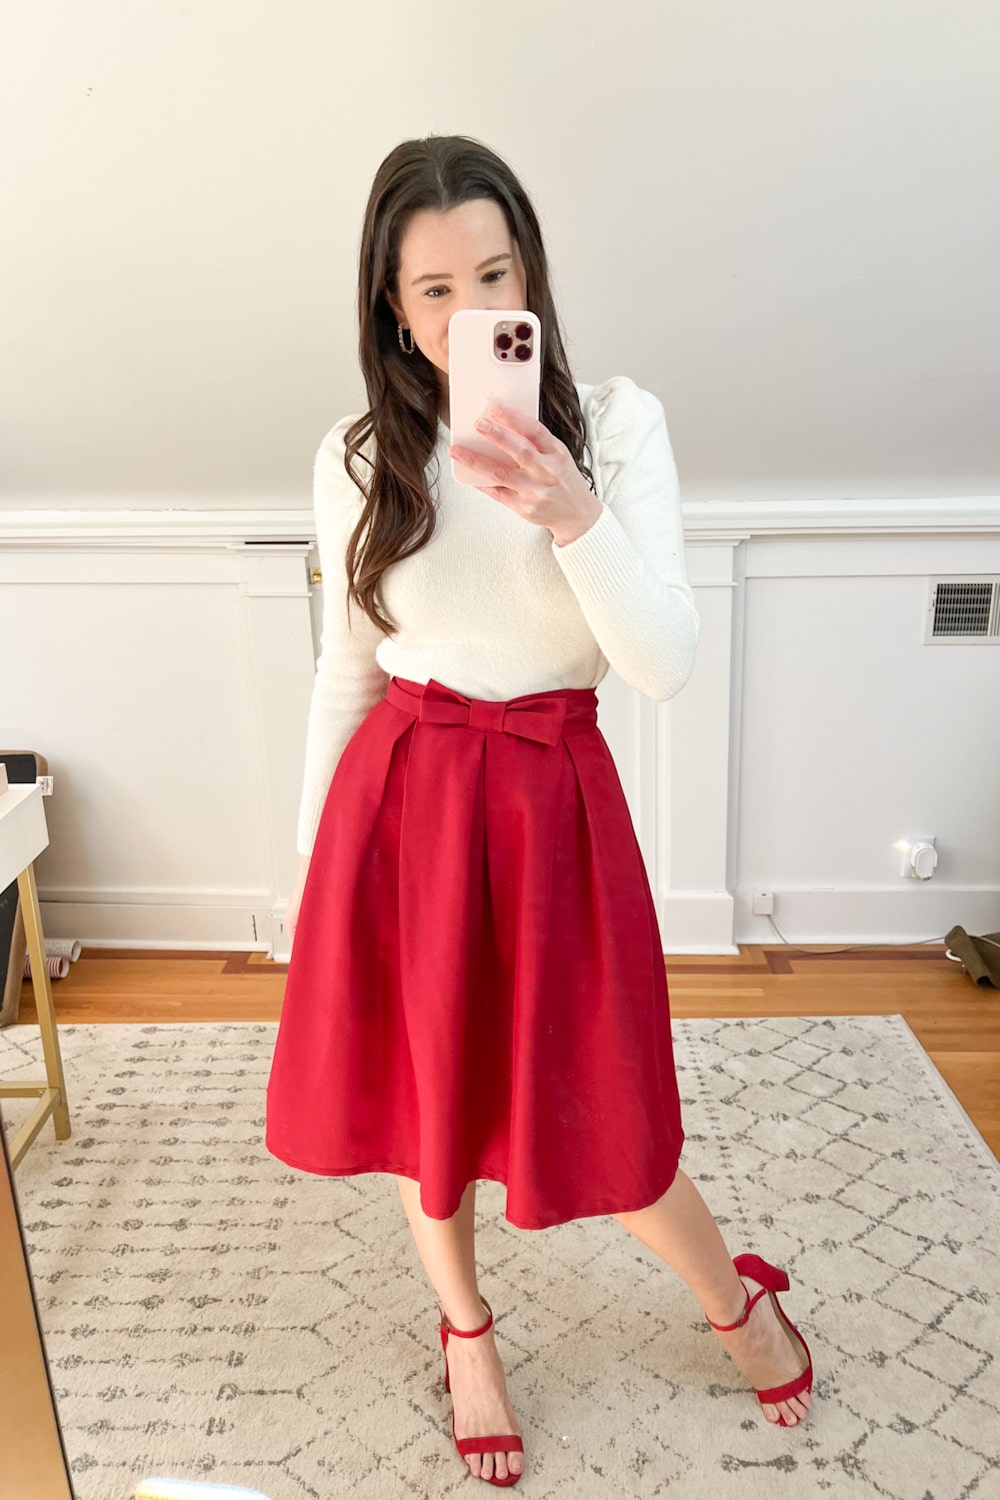 Holiday casual attire inspiration from affordable fashion blogger Stephanie Ziajka on Diary of a Debutante